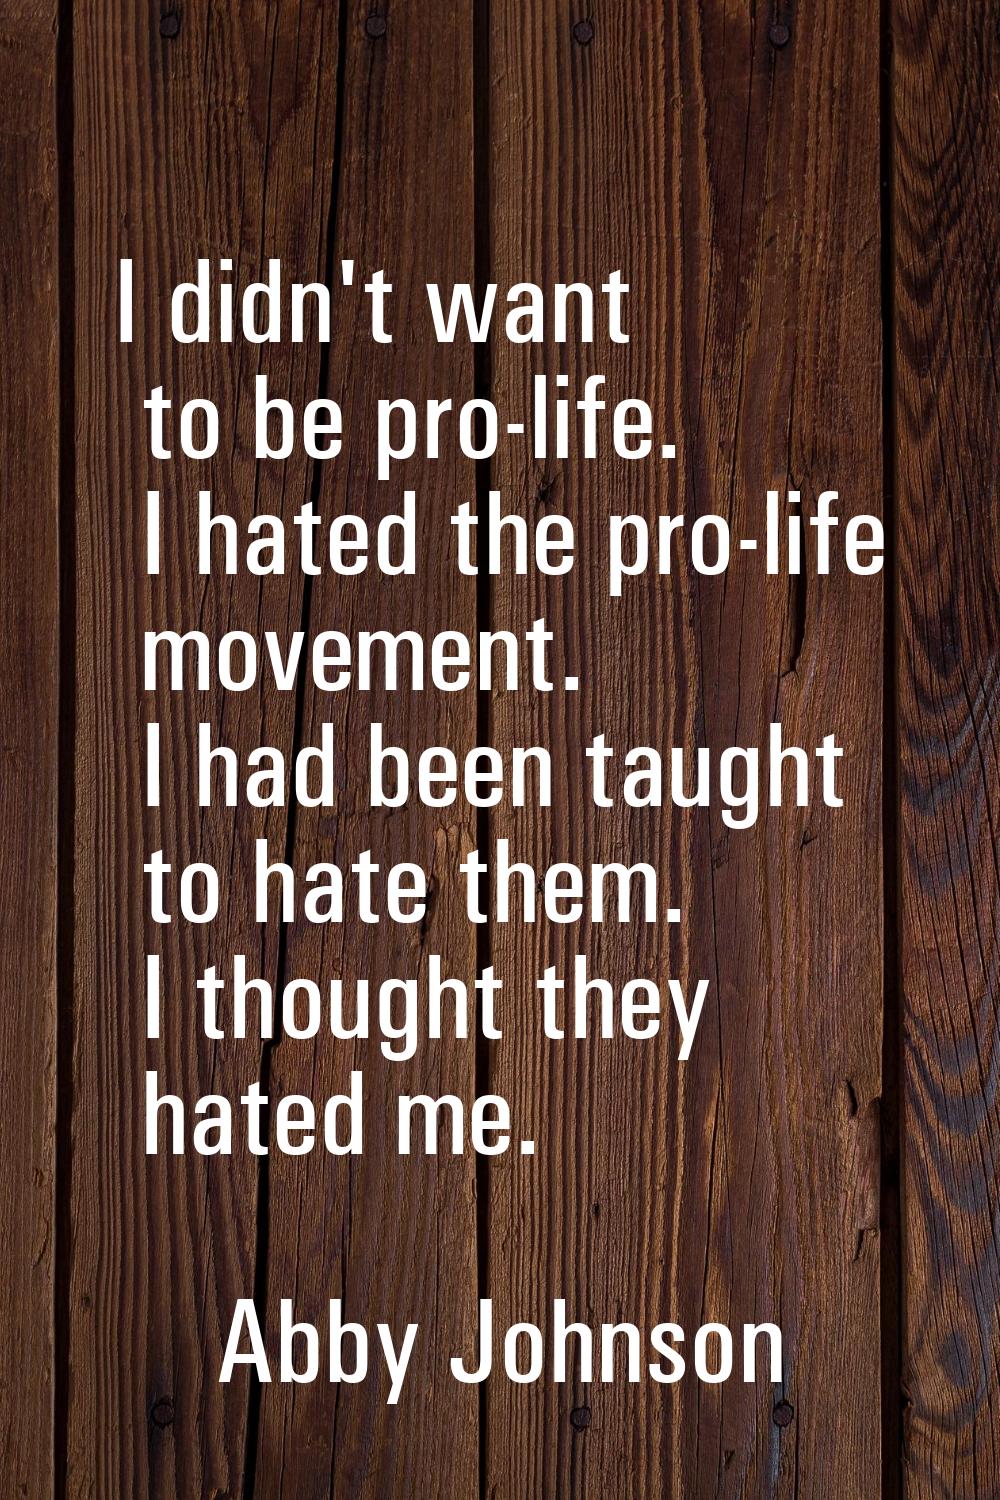 I didn't want to be pro-life. I hated the pro-life movement. I had been taught to hate them. I thou